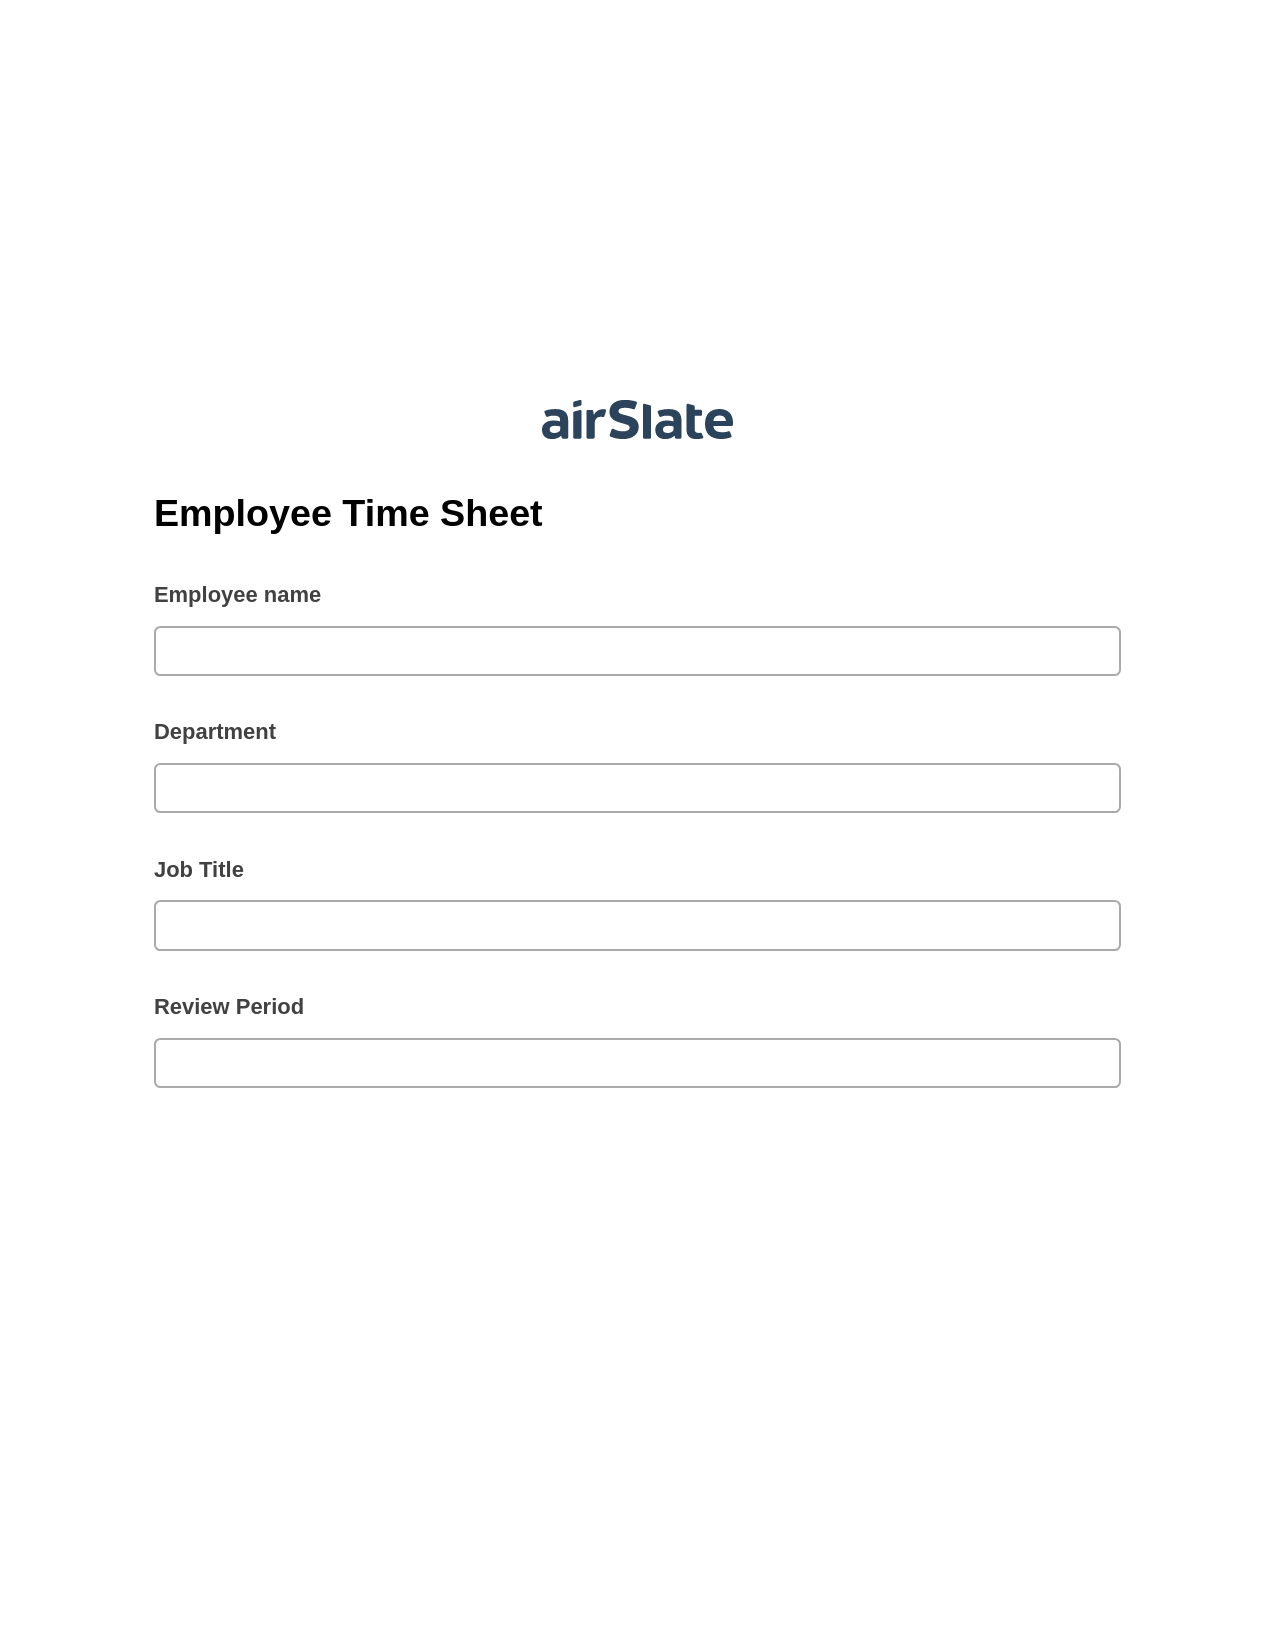 Multirole Employee Time Sheet Pre-fill Dropdowns from CSV file Bot, Create Salesforce Records Bot, Archive to Google Drive Bot